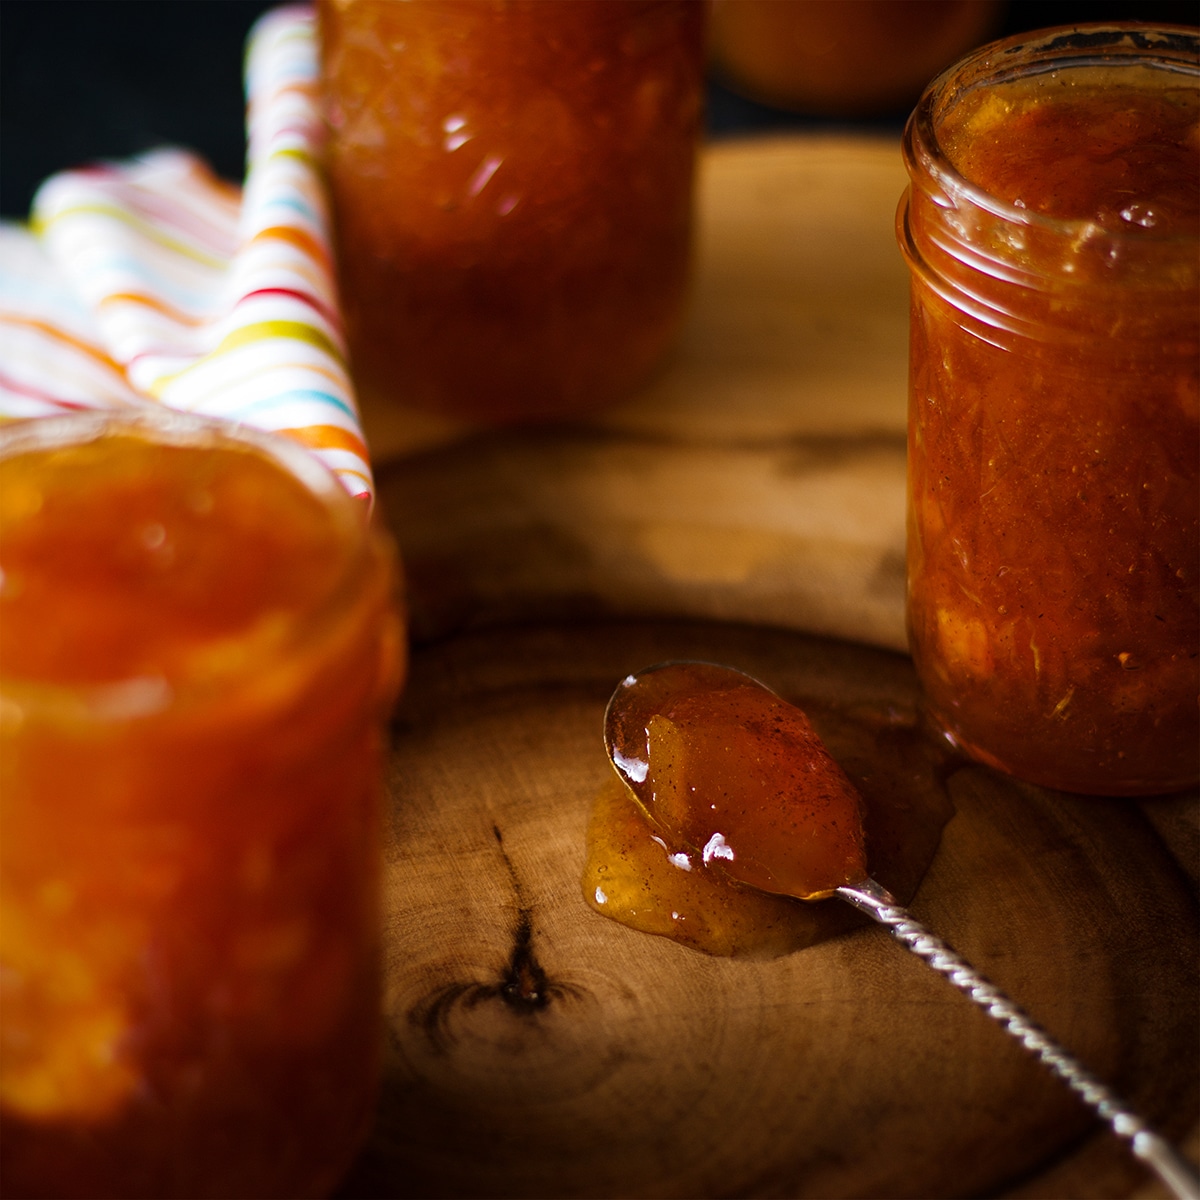 A spoonful of homemade peach preserves resting on a wood table next to several jars of peach preserves.